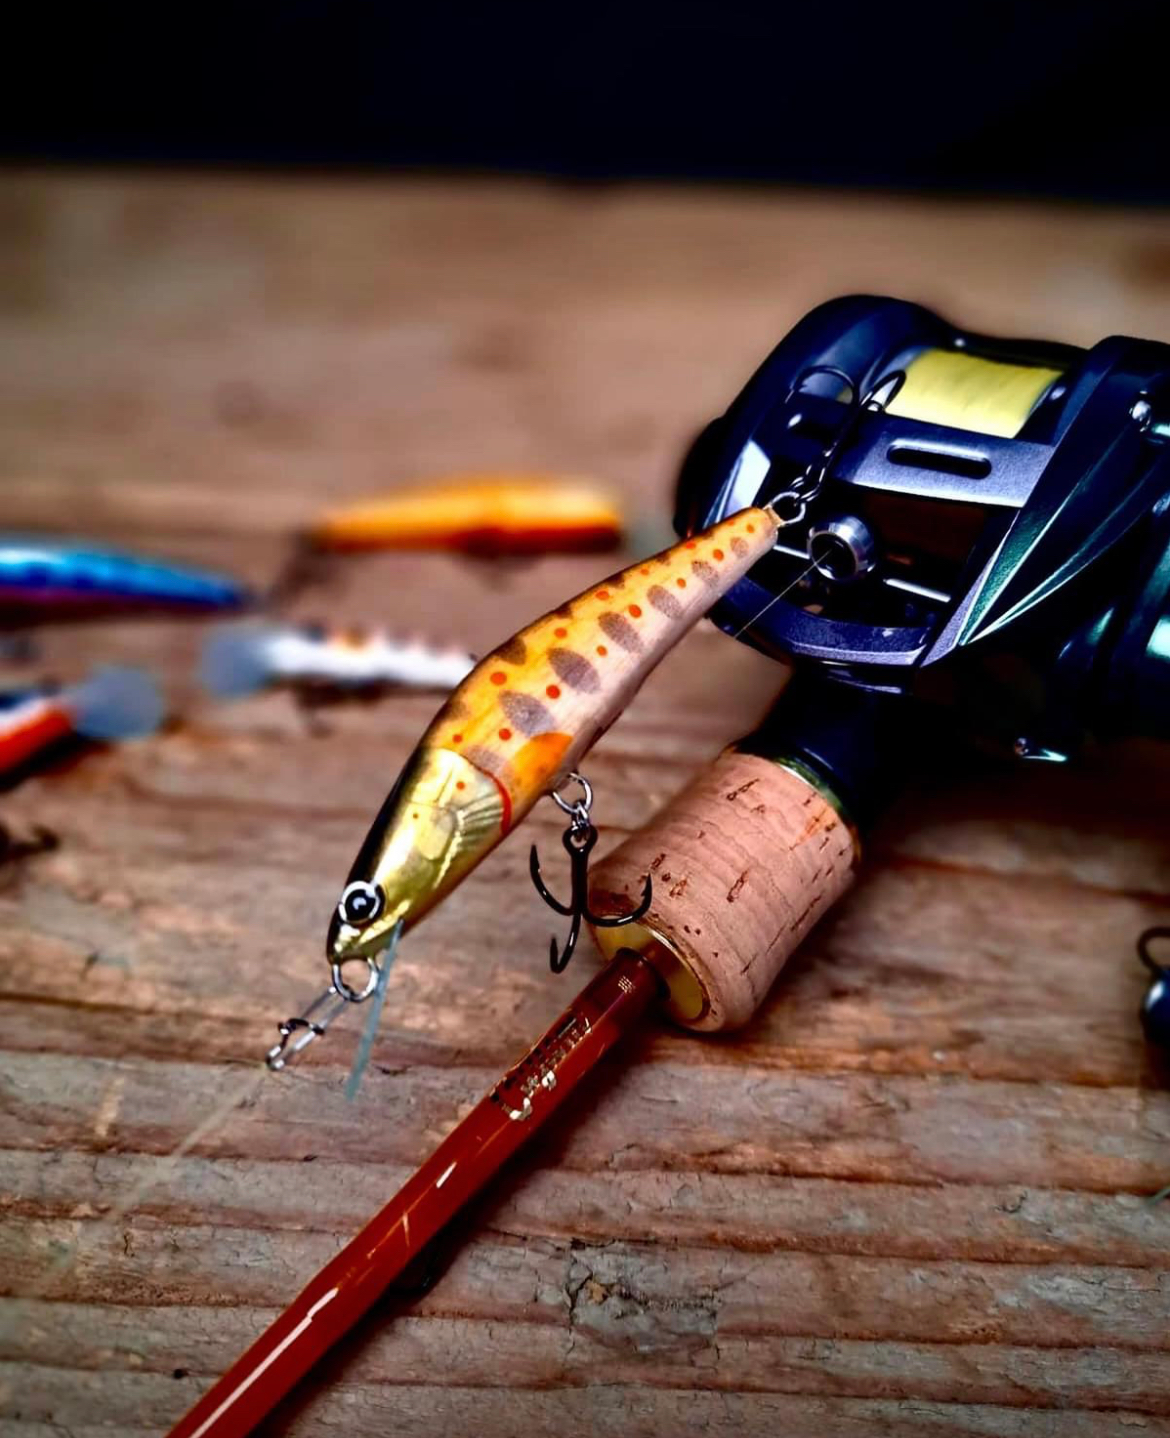 BF Lures Handcrafted Tasmanian Timber Lures – Trophy Trout Lures